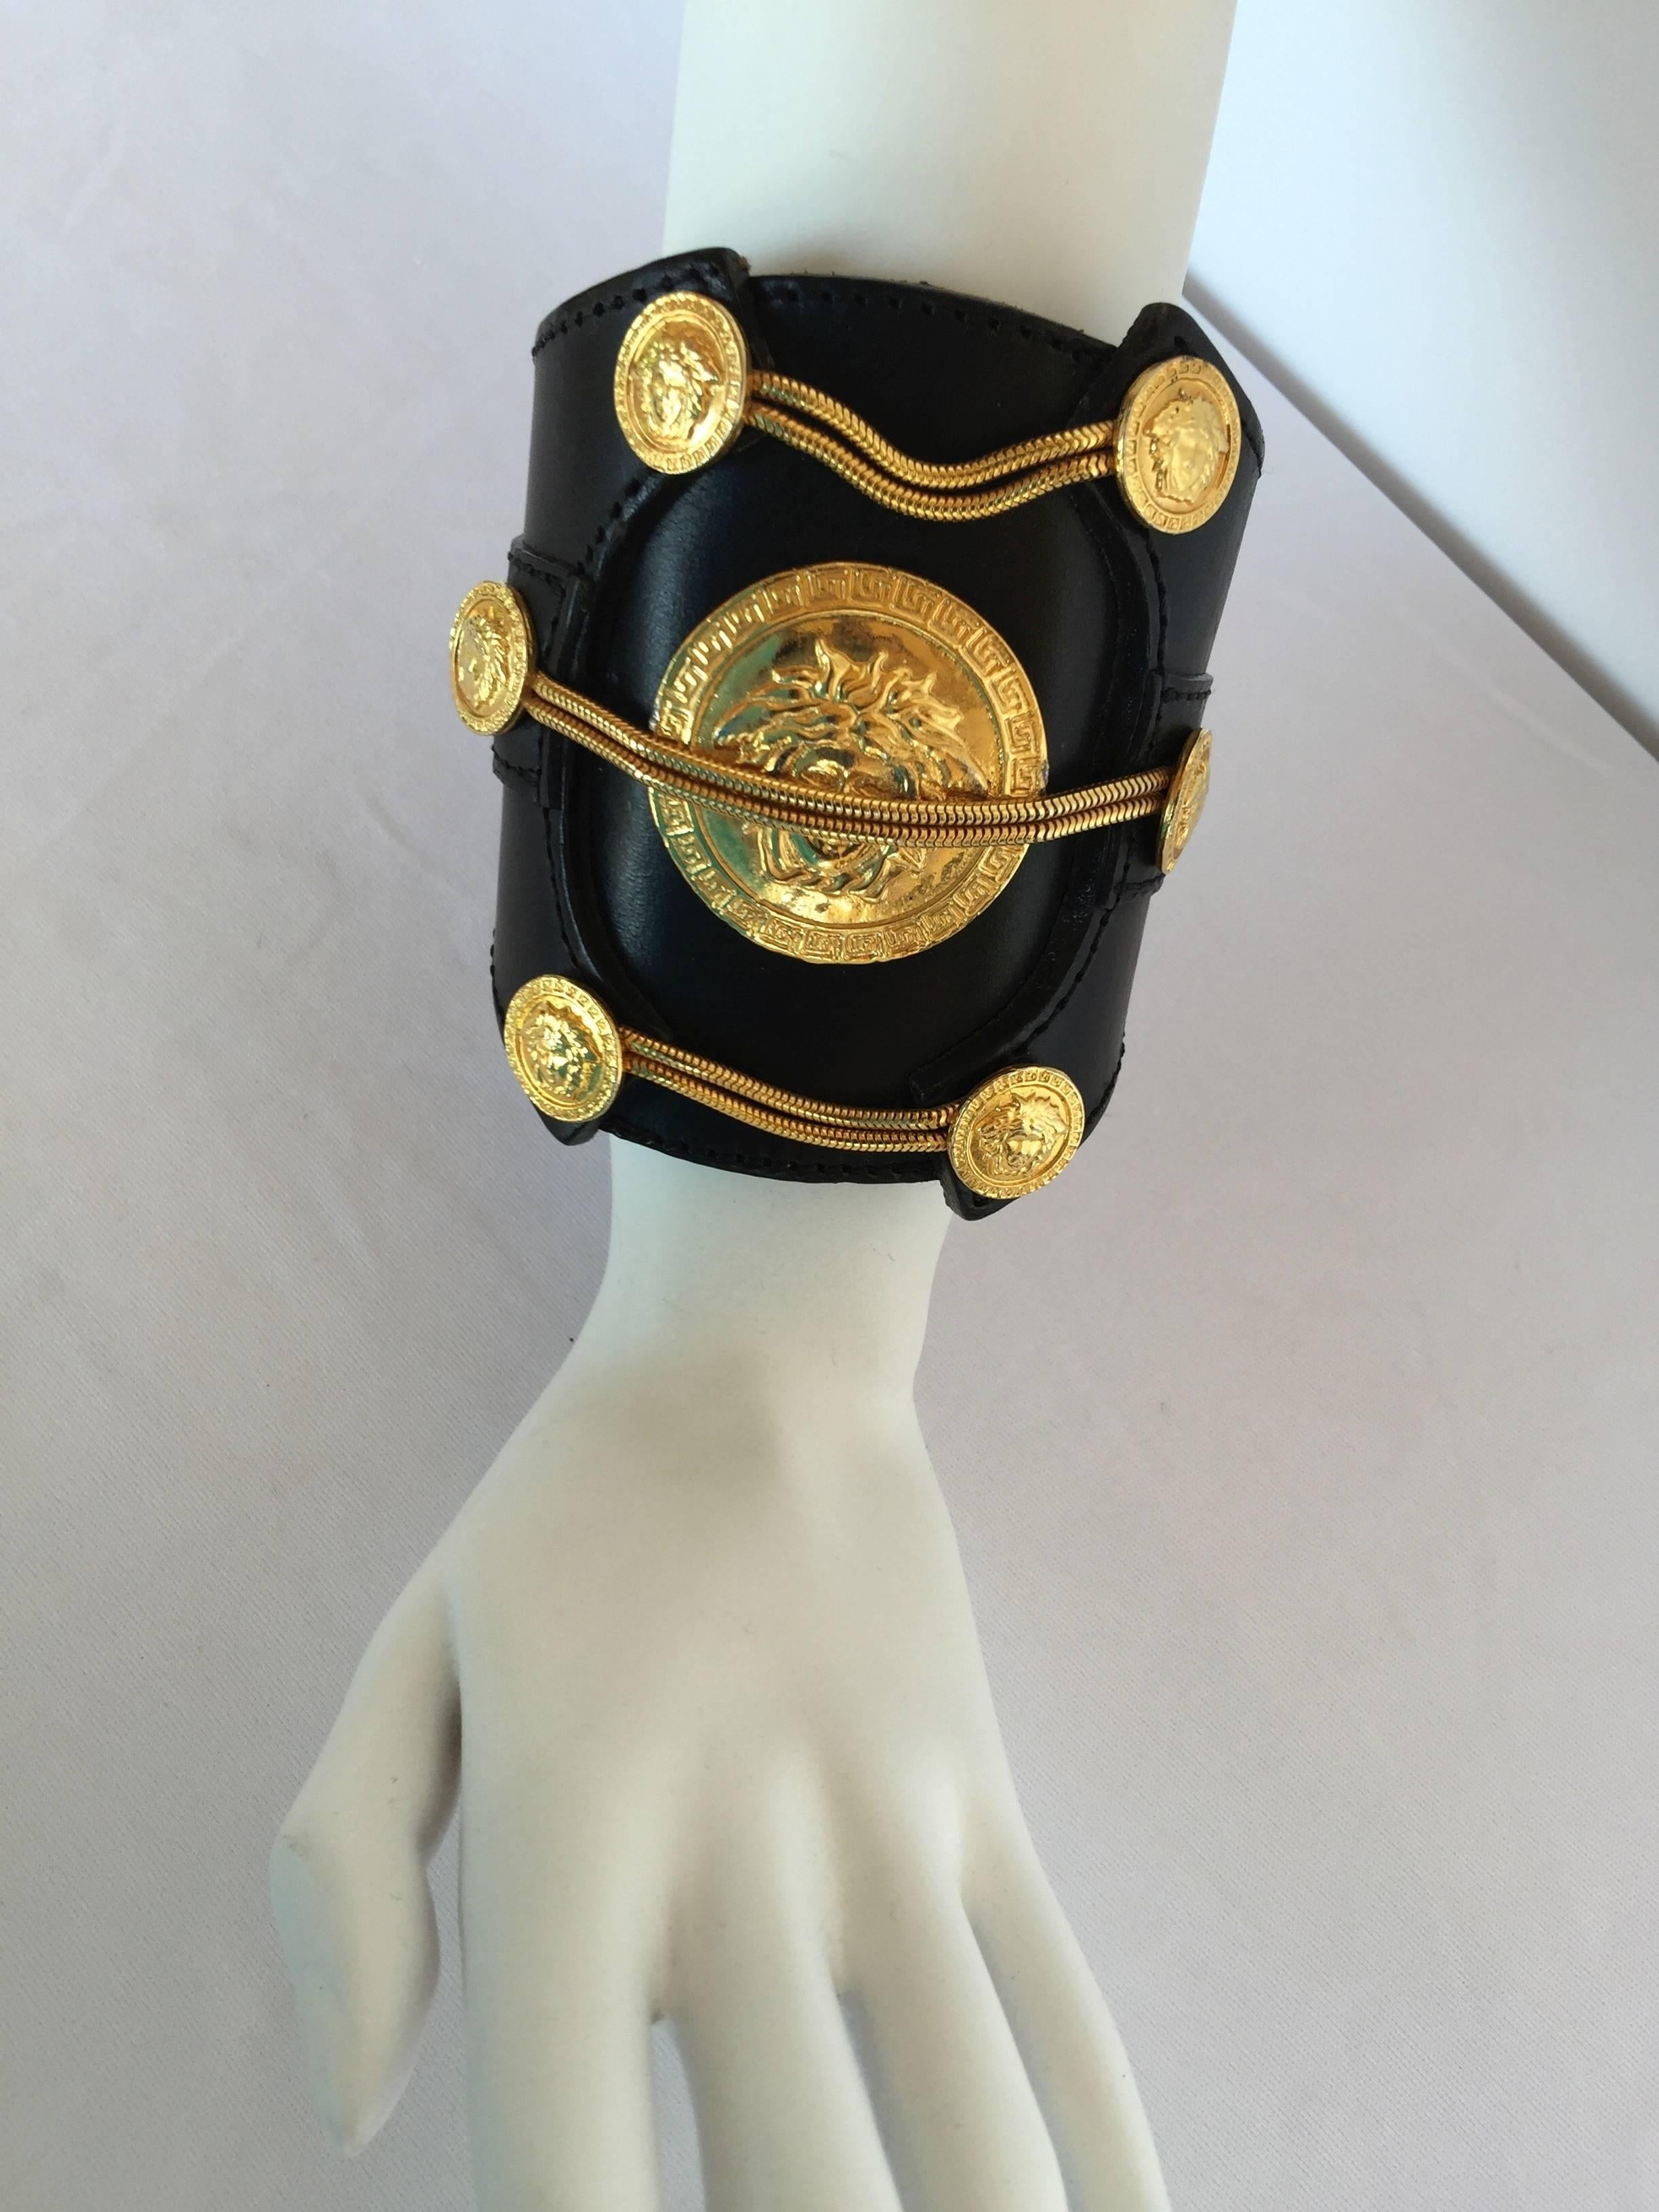 Haute couture, runway scale, black leather cuff studded with snake chains and multiple gilt Medusa medallions by Gianni Versace.

Curiously, the central Medusa's eyes are veiled by a pair of gilt chains, perhaps as a reference to the Greek idea